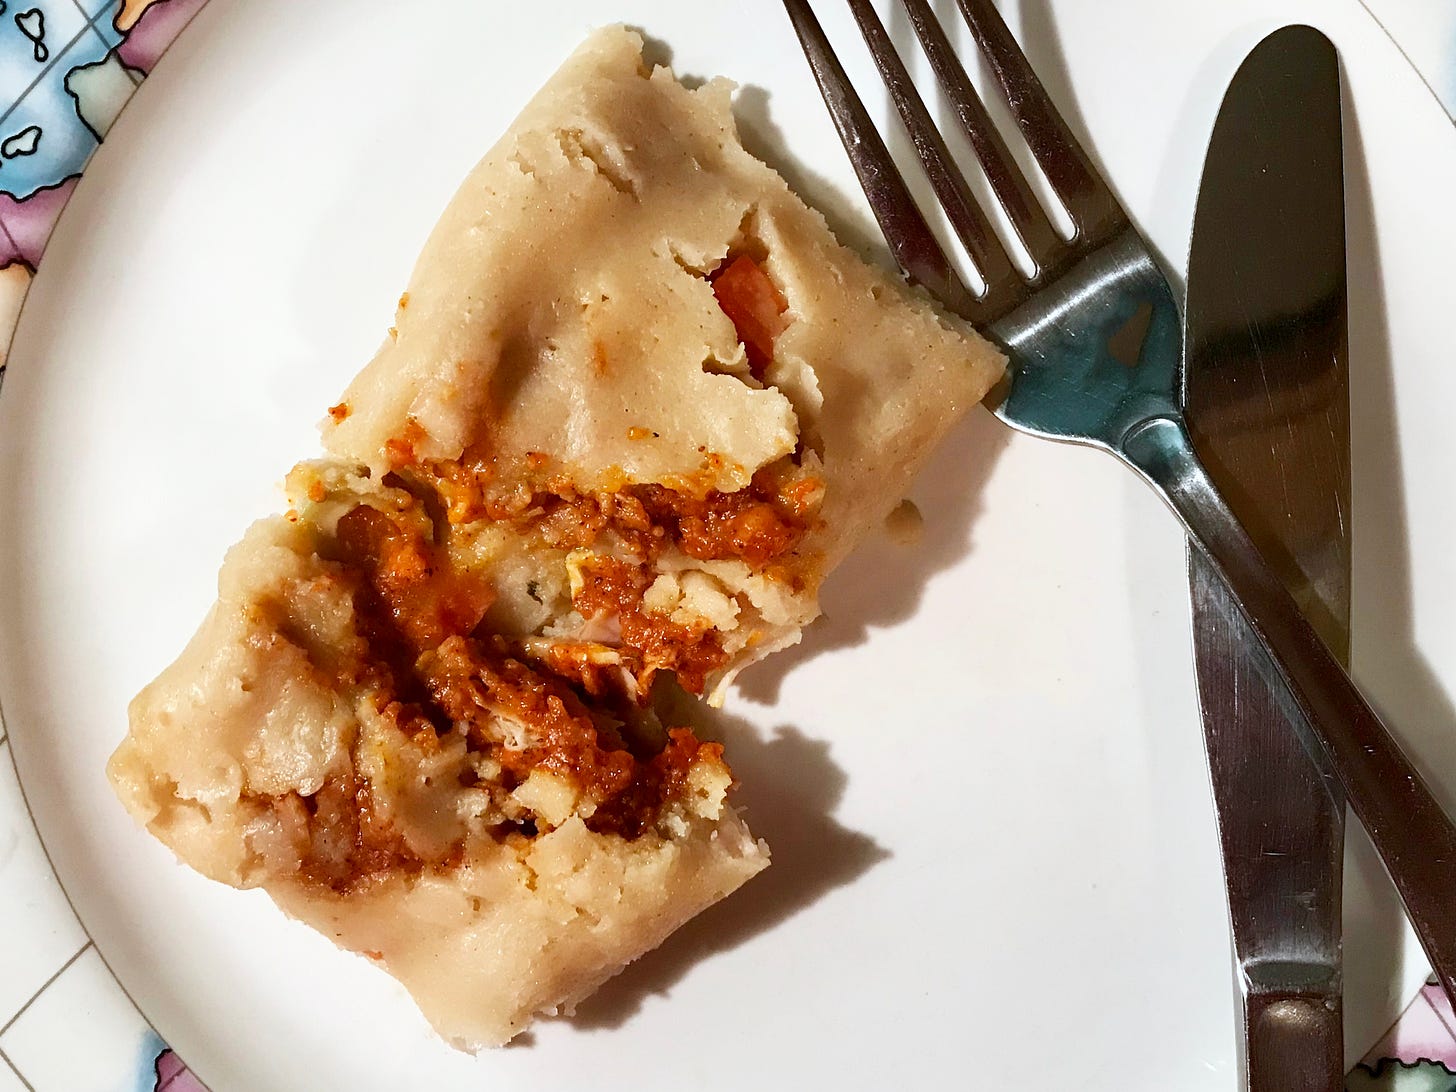 An unwrapped tamale on a plate with a knife and fork. The tamale is cut so the filling cane be seen.